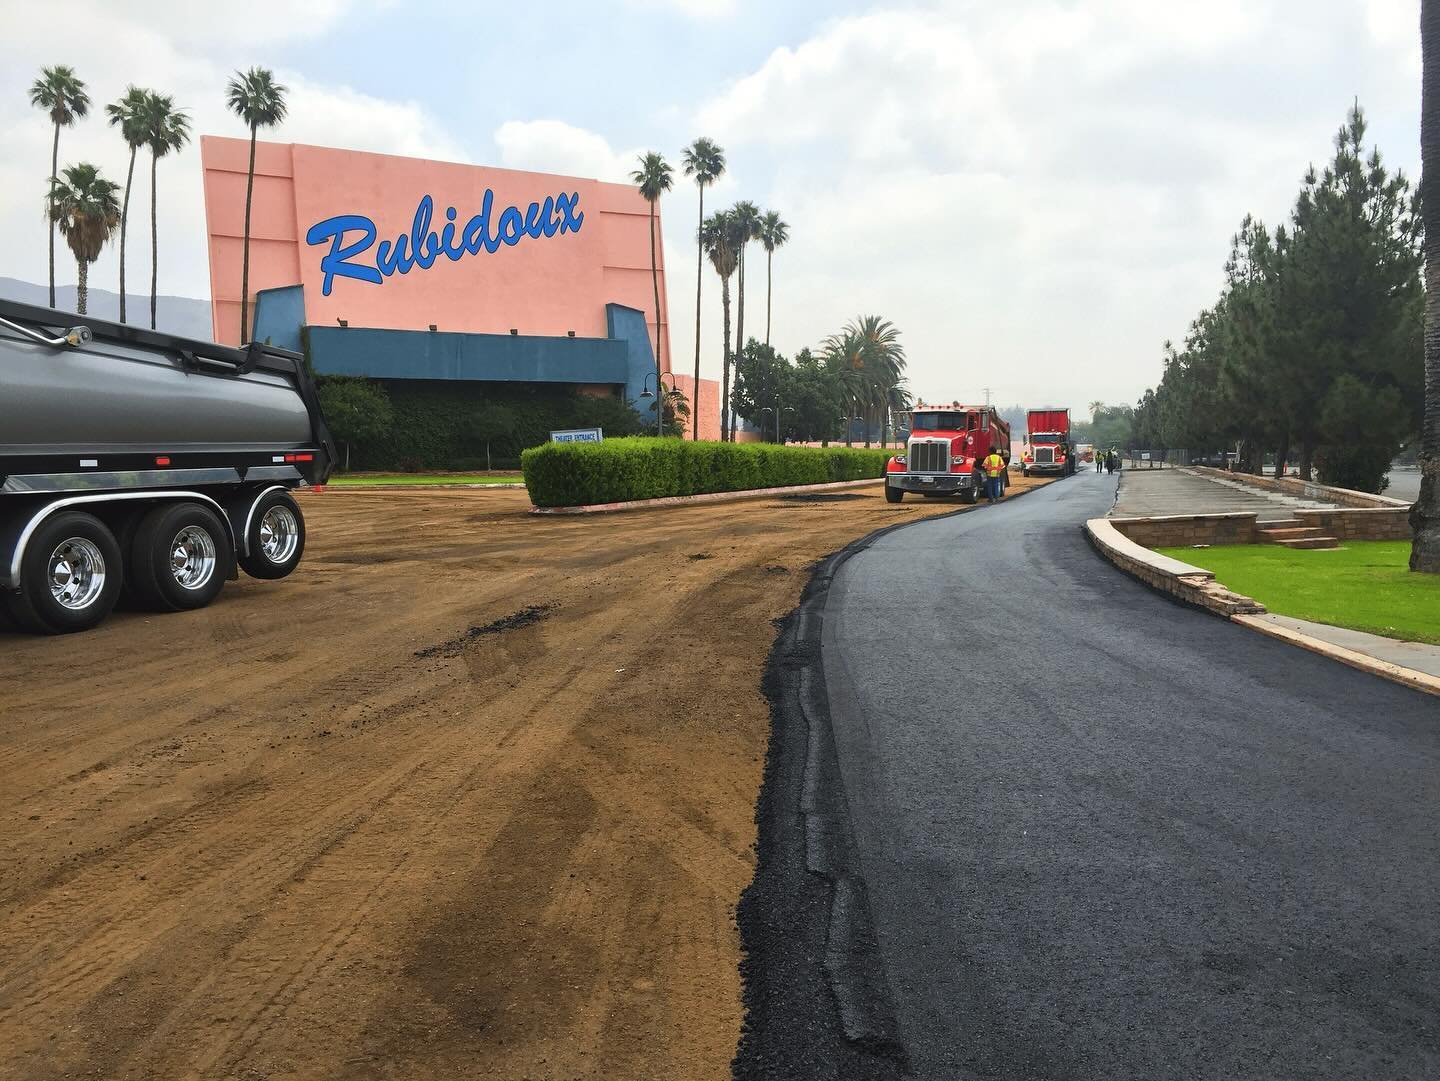 We did this job in 2016 at the Rubidoux Drive-In Theatre in Riverside. We removed and replaced approx. 92,000 sq. ft. of asphalt and sealed 583,000 sq. ft. This theatre was opened in 1948 and with proper maintenance, they will be looking great for th